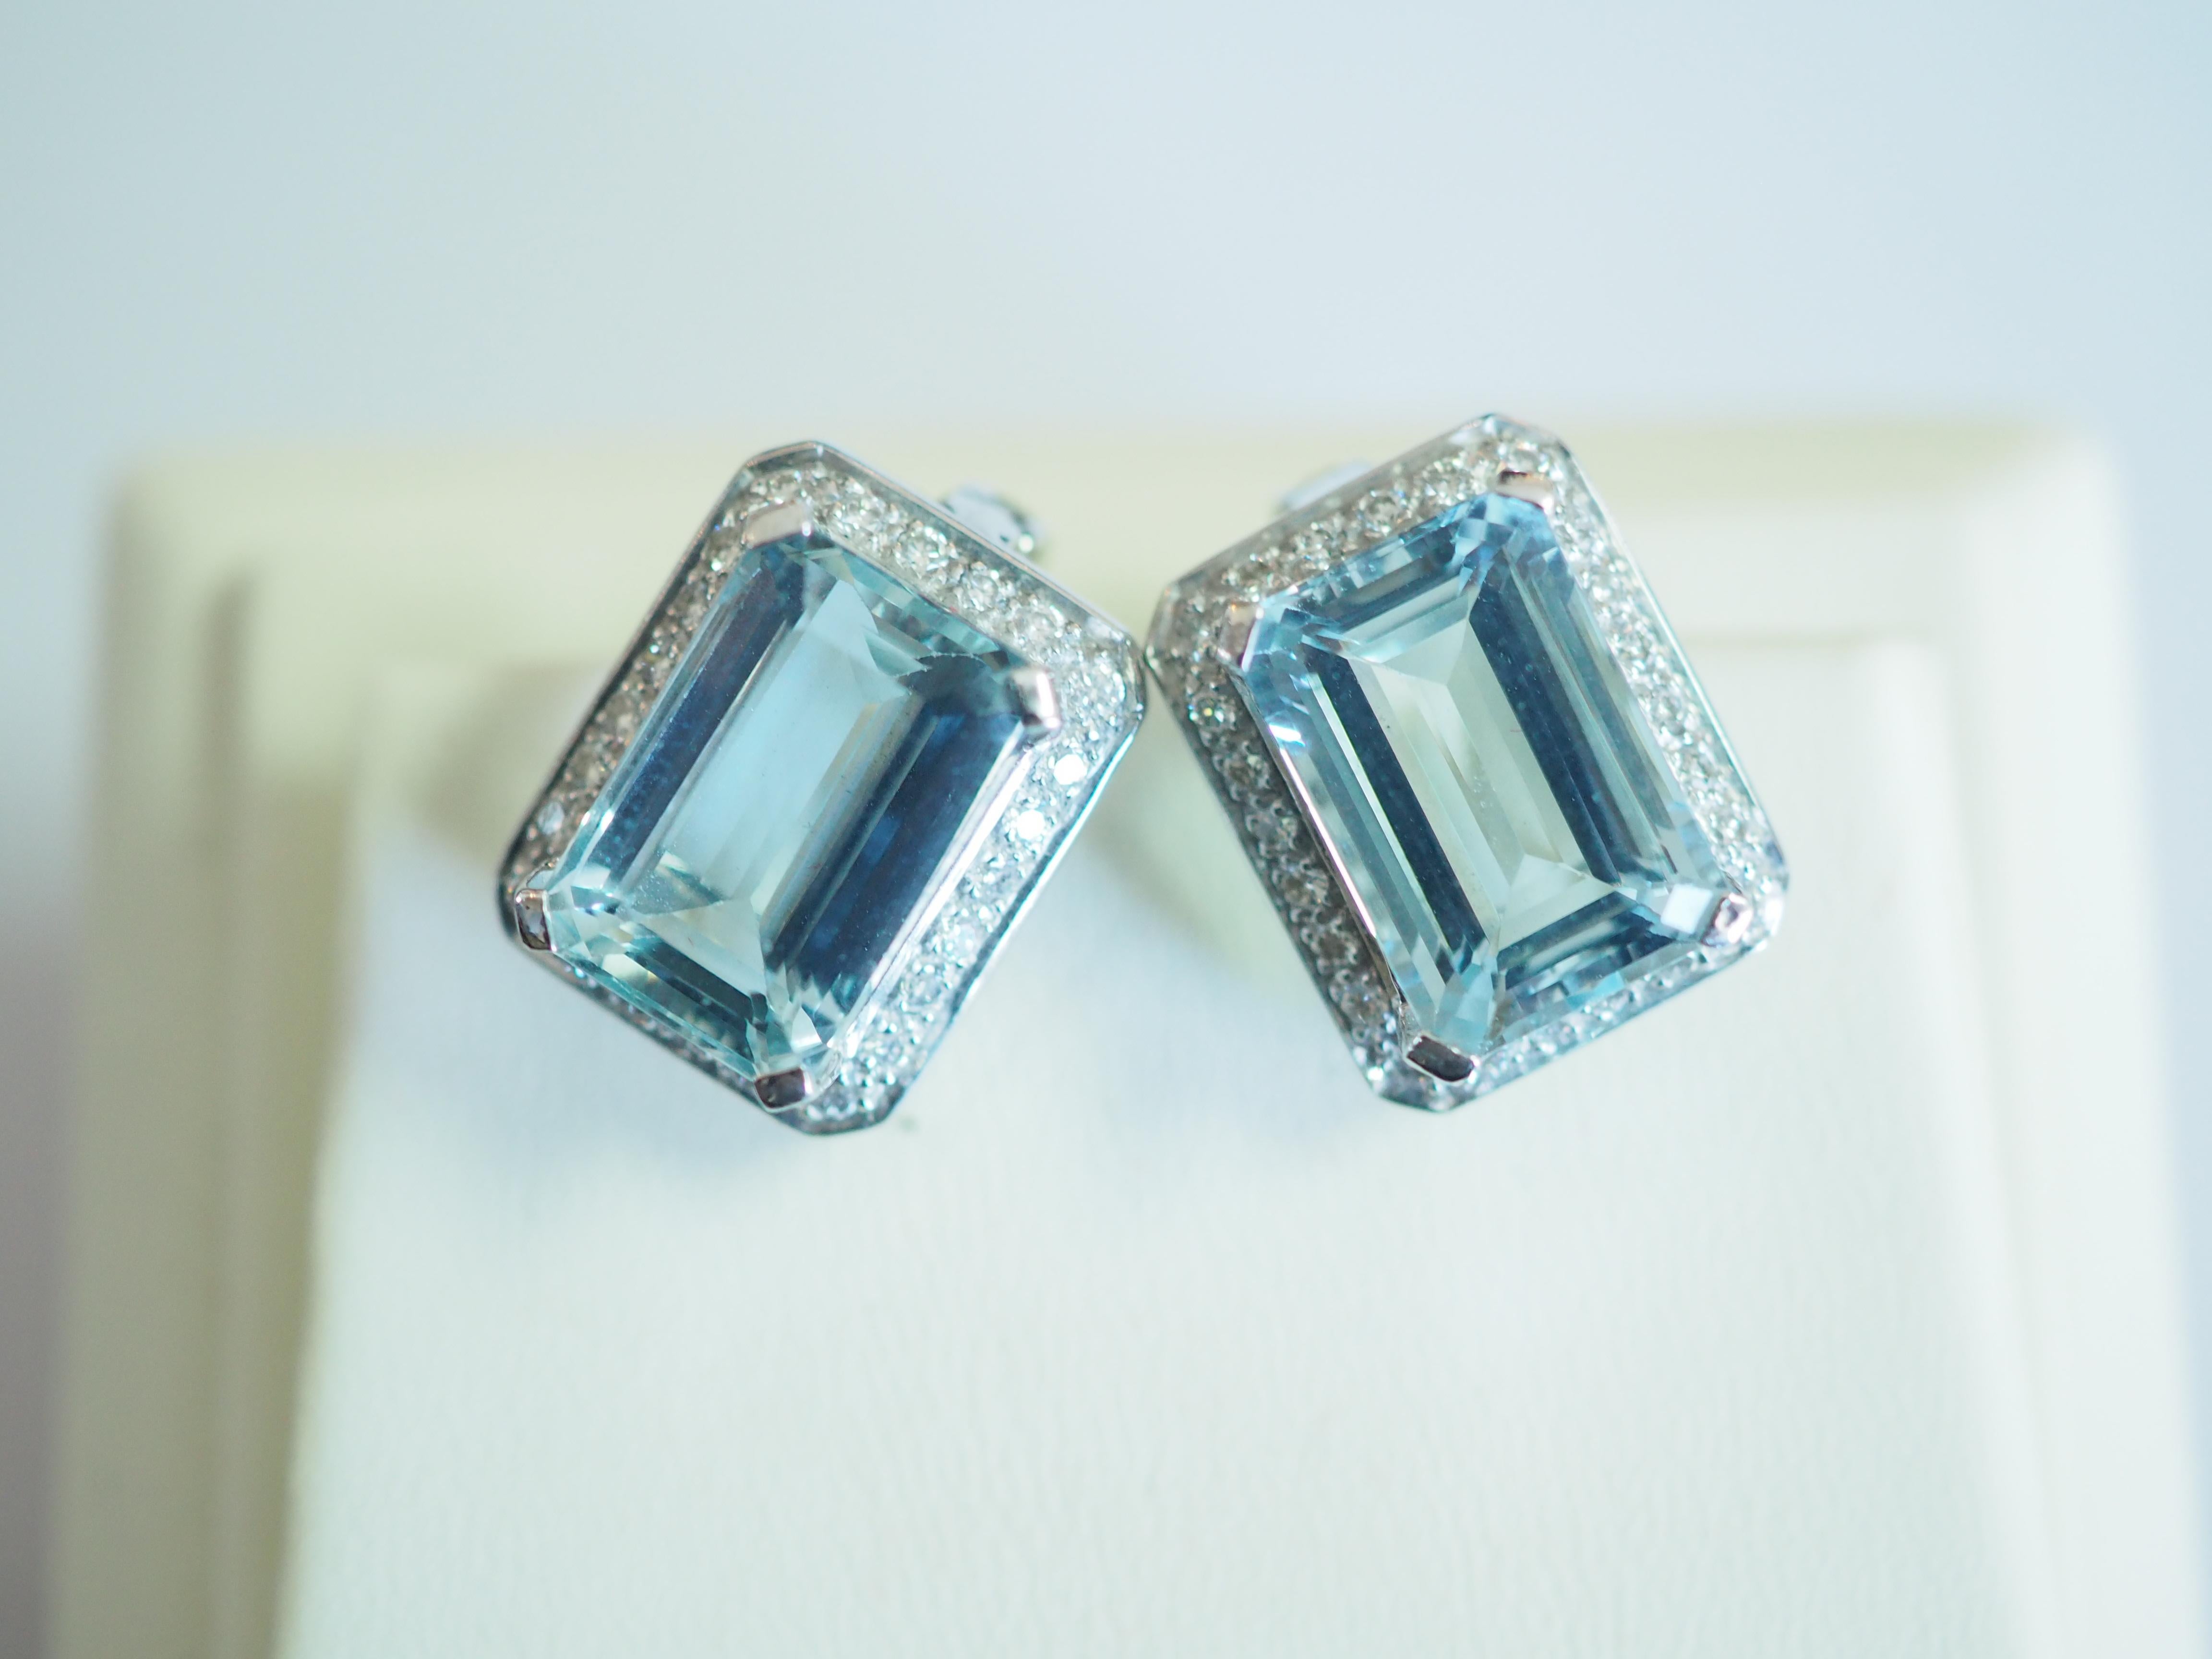 Beautiful latch back earrings made in the early 2000's and has never been worn. There are 2 good quality and decent sizes of emerald cut aquamarines. The aquamarines are all set in prong and with immaculate craftsmanship. The brilliant melee